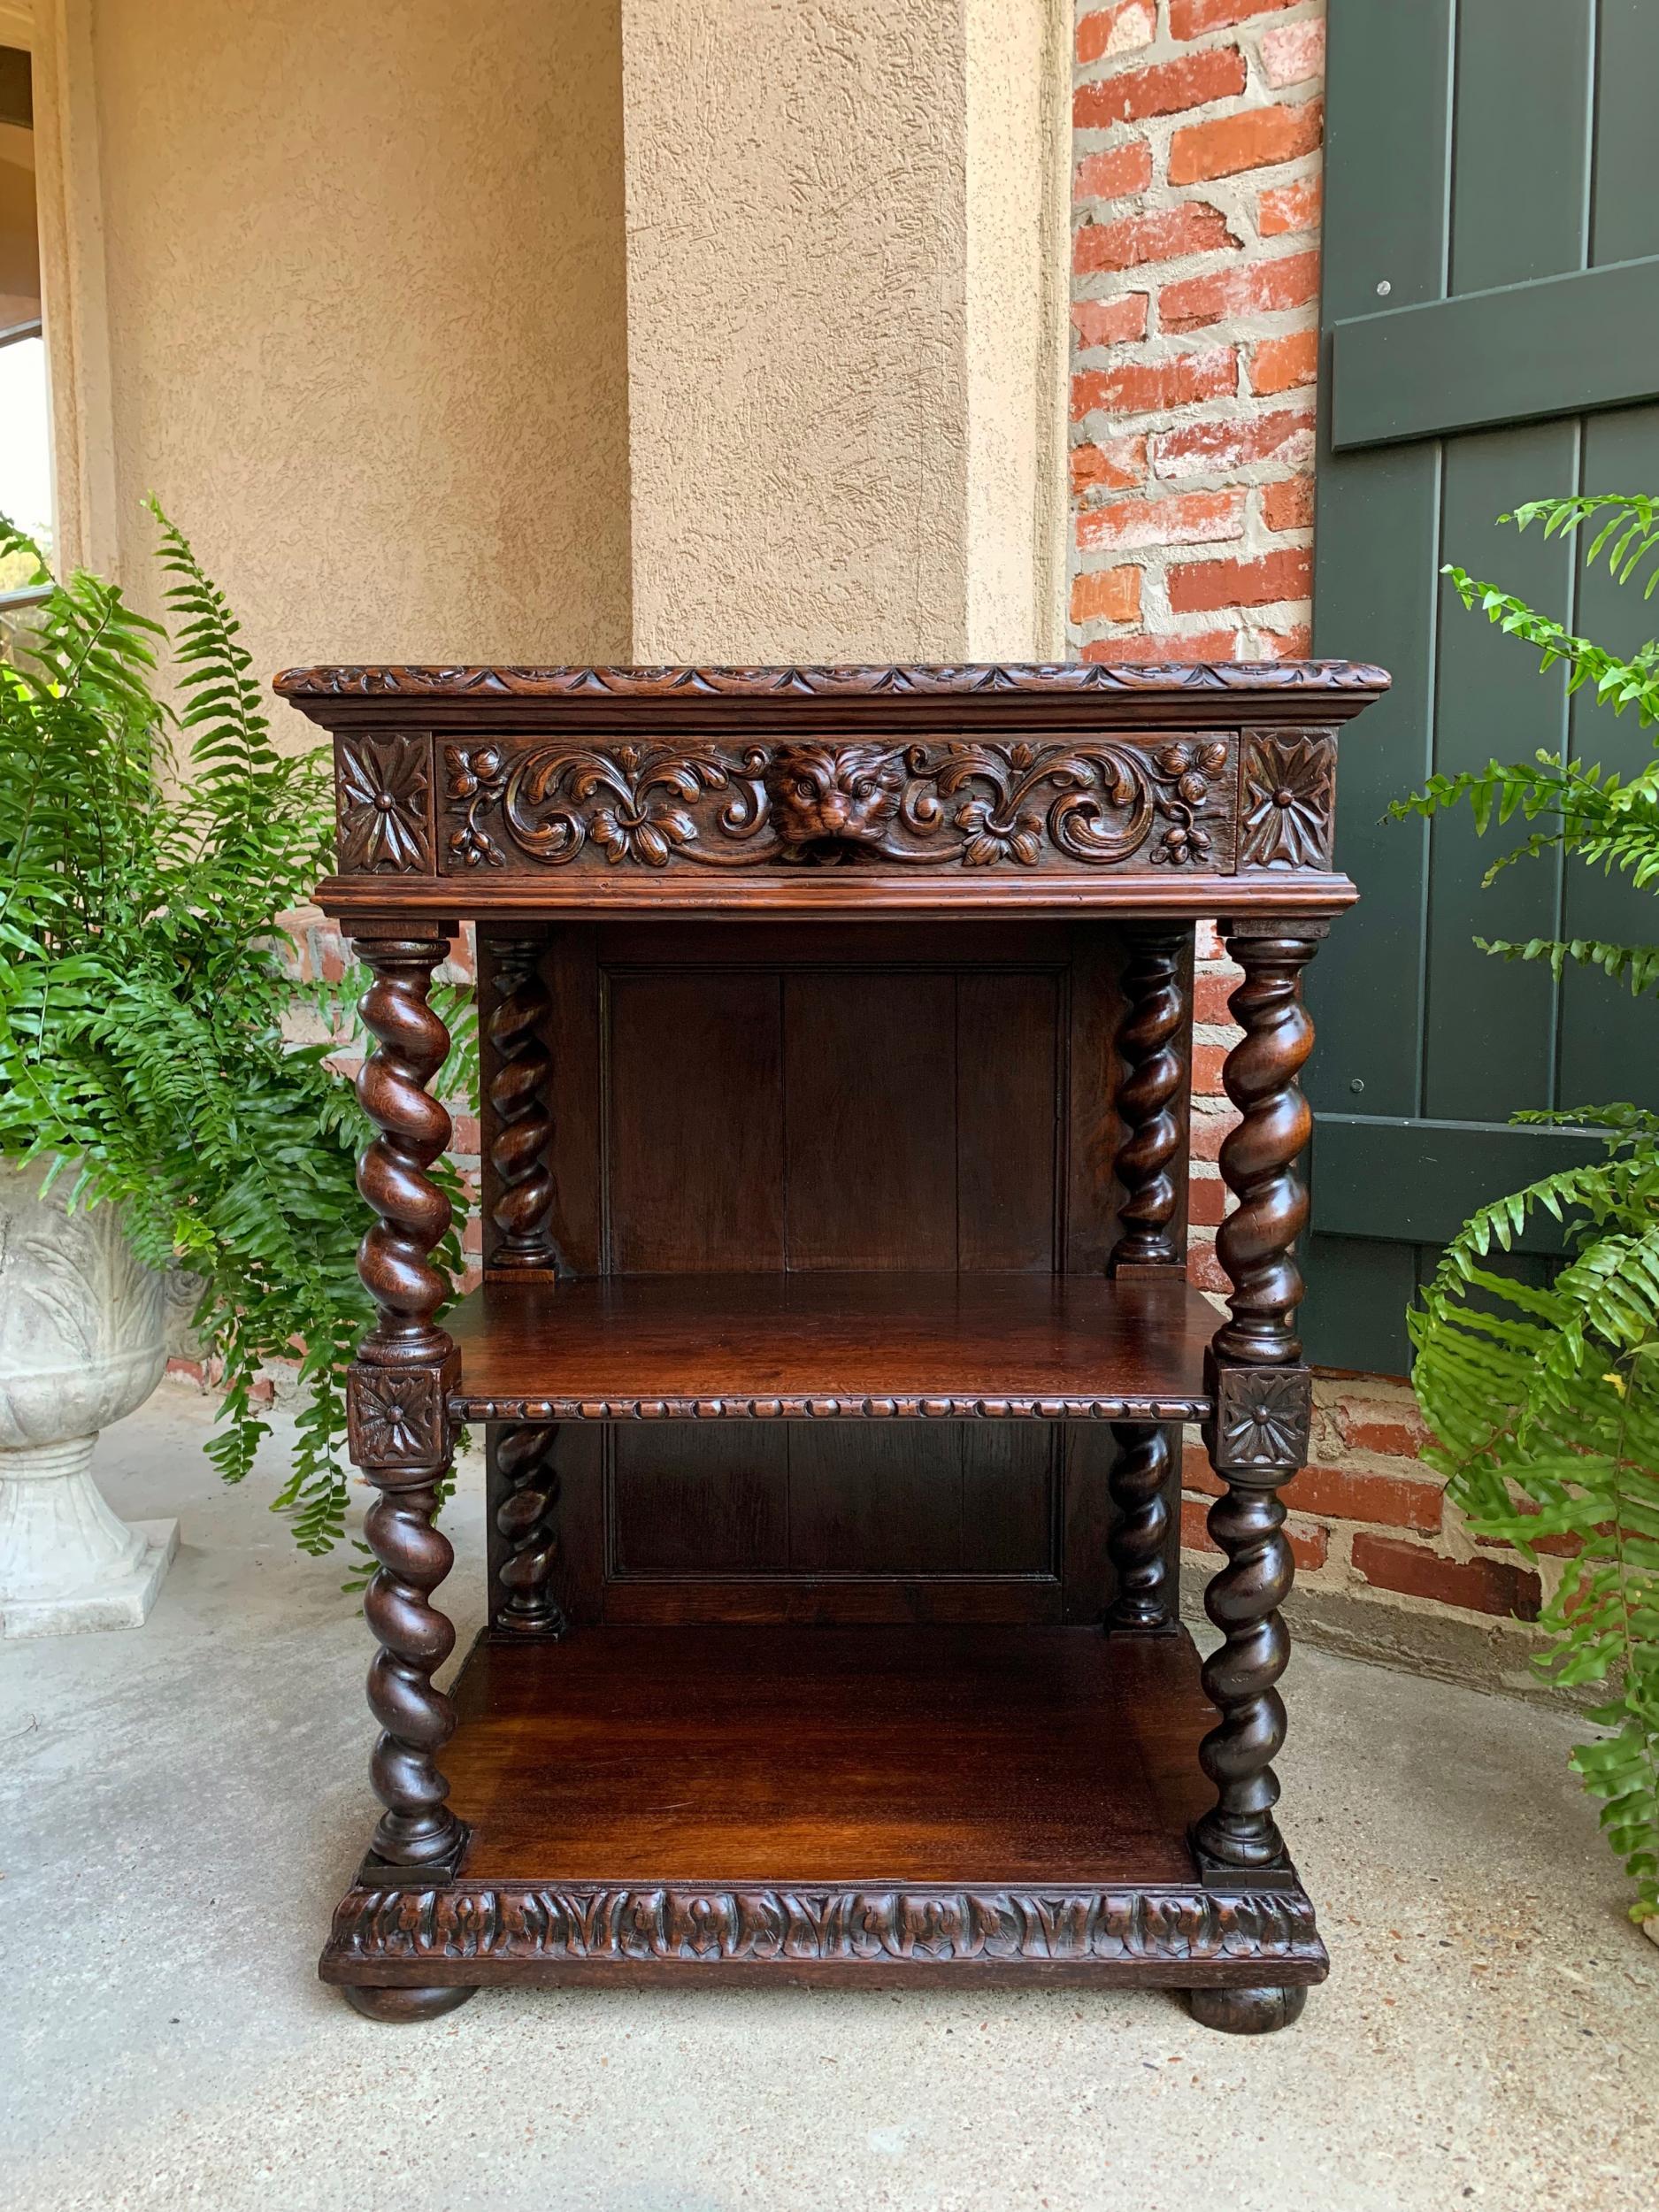 Antique French carved oak petite bookcase server barley twist display louis XIII

~Direct from France~
Very special petite size 19th century French Louis XIII style sideboard/server or bookcase.
Fabulous details with a carved beveled edge top above